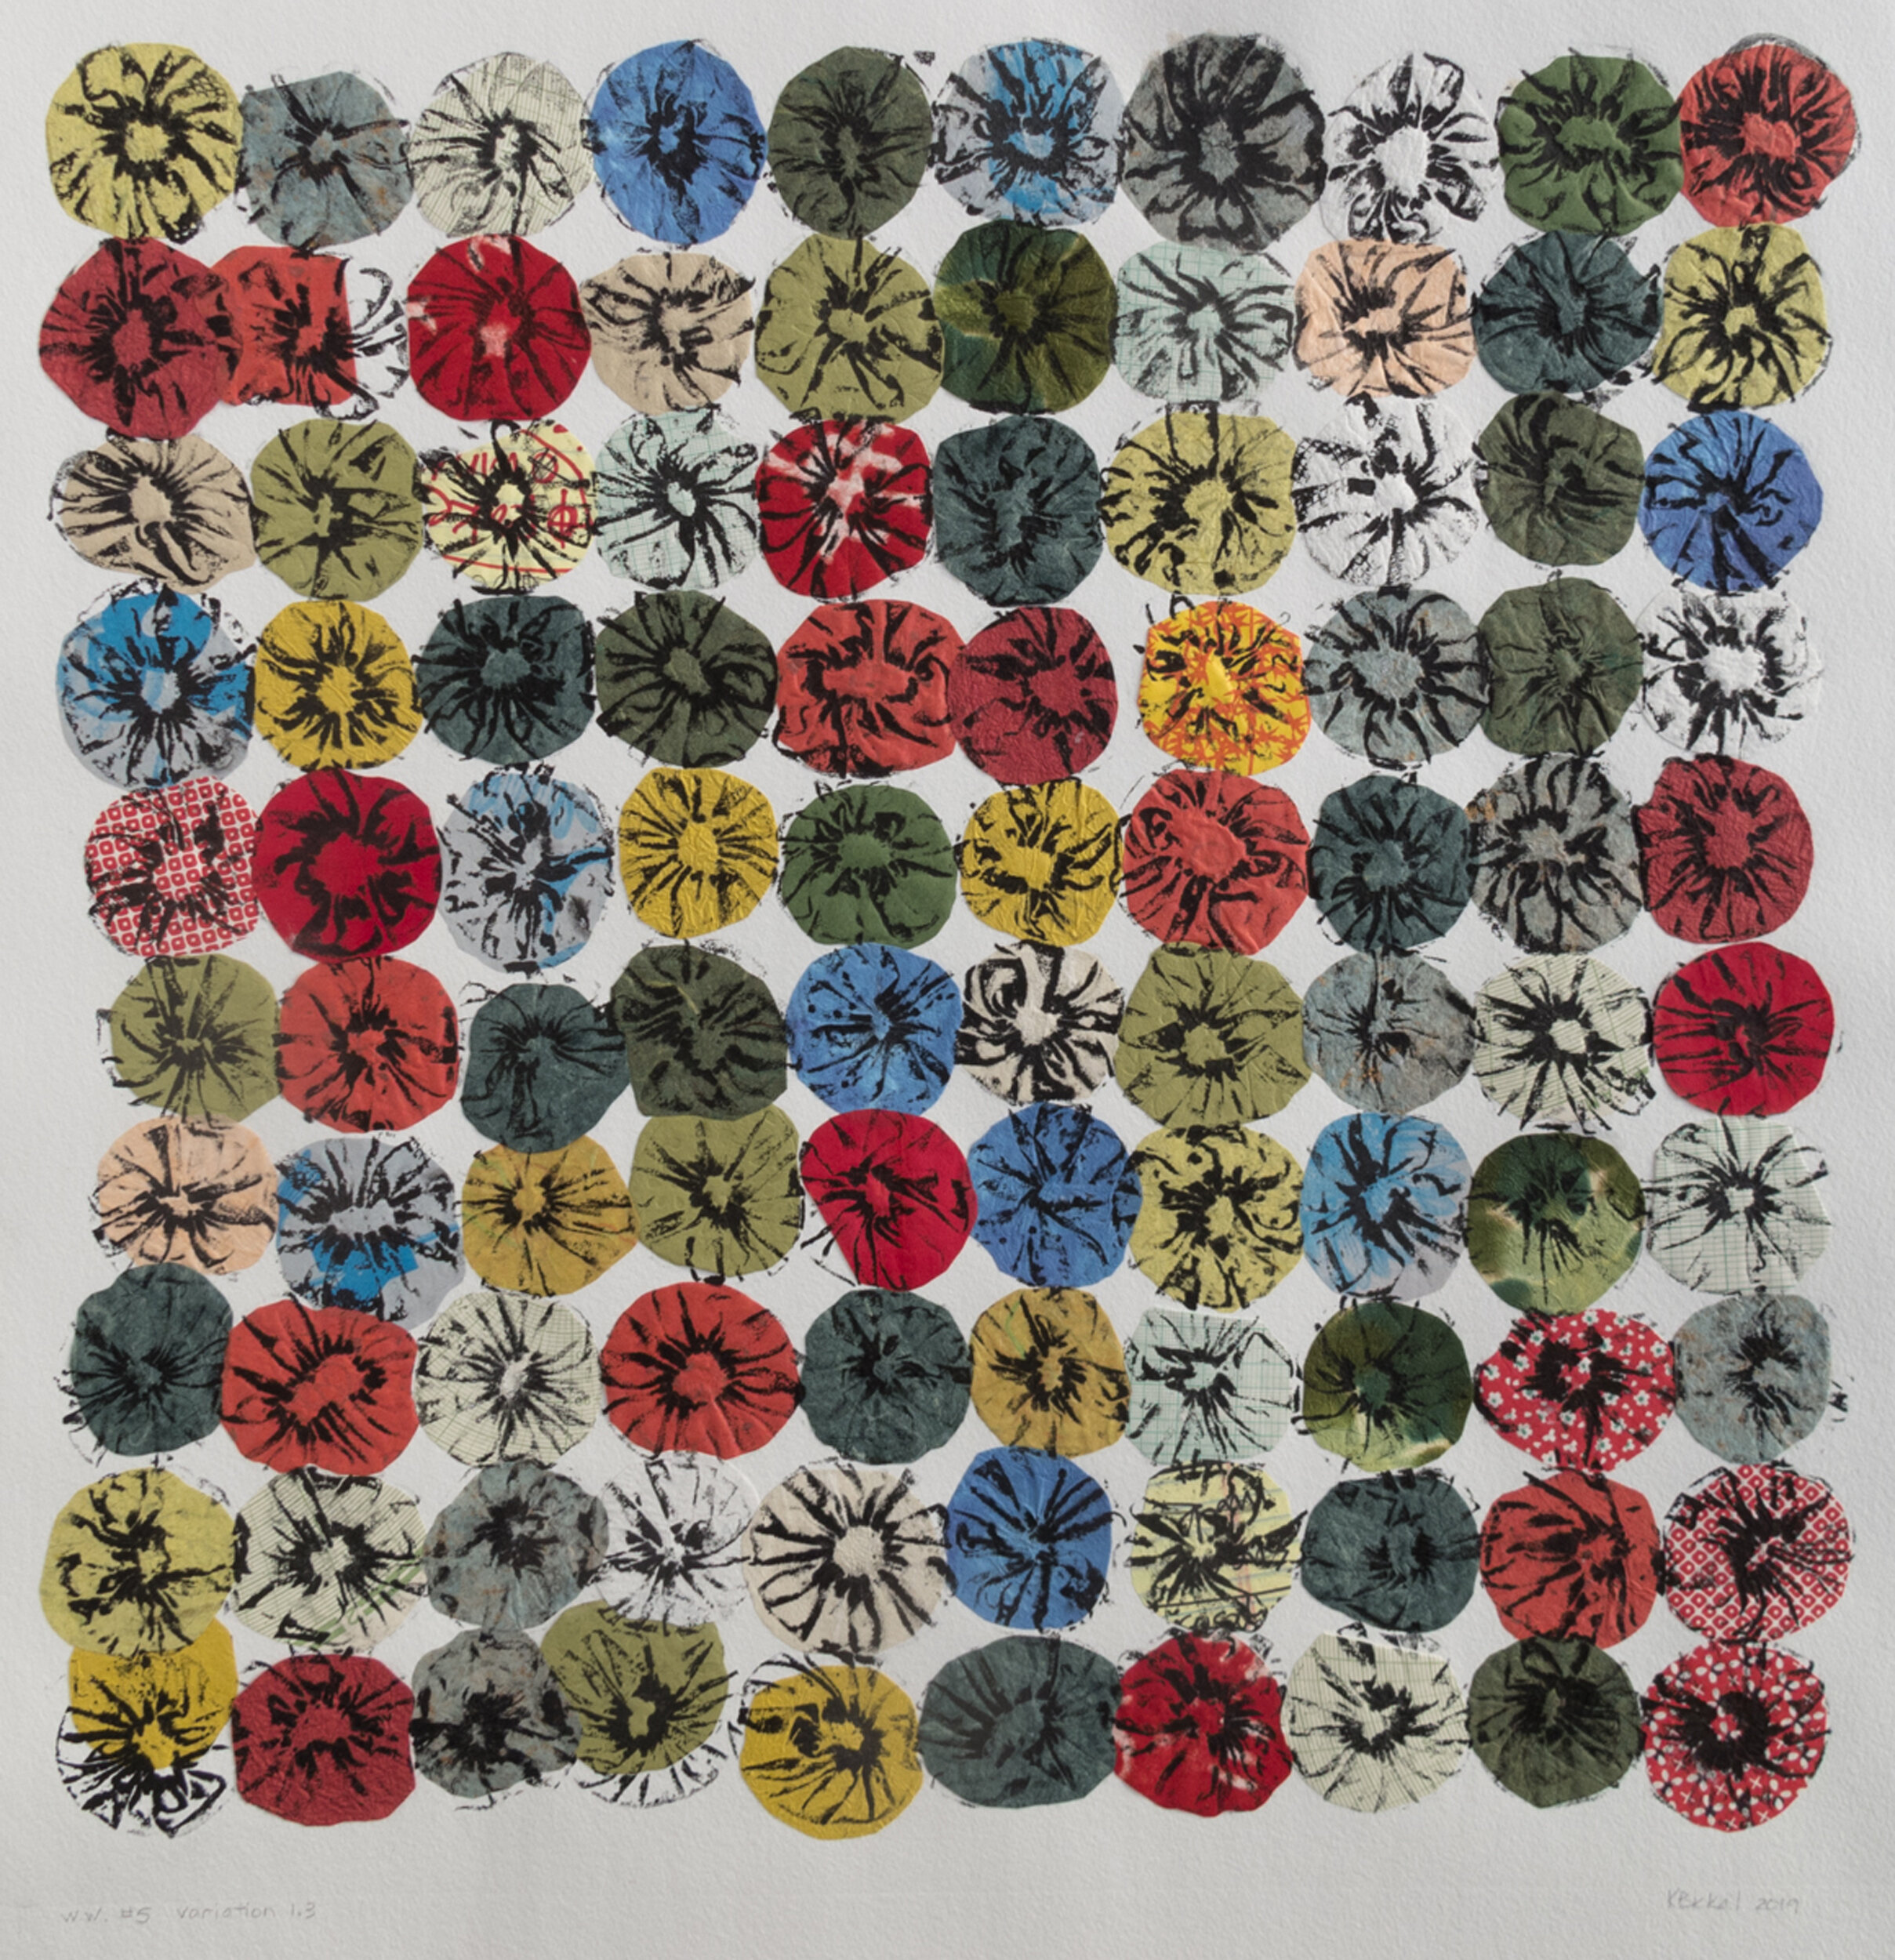 Kristin Bickal; W.W. #5, variation 1.3; collograph with chine collé